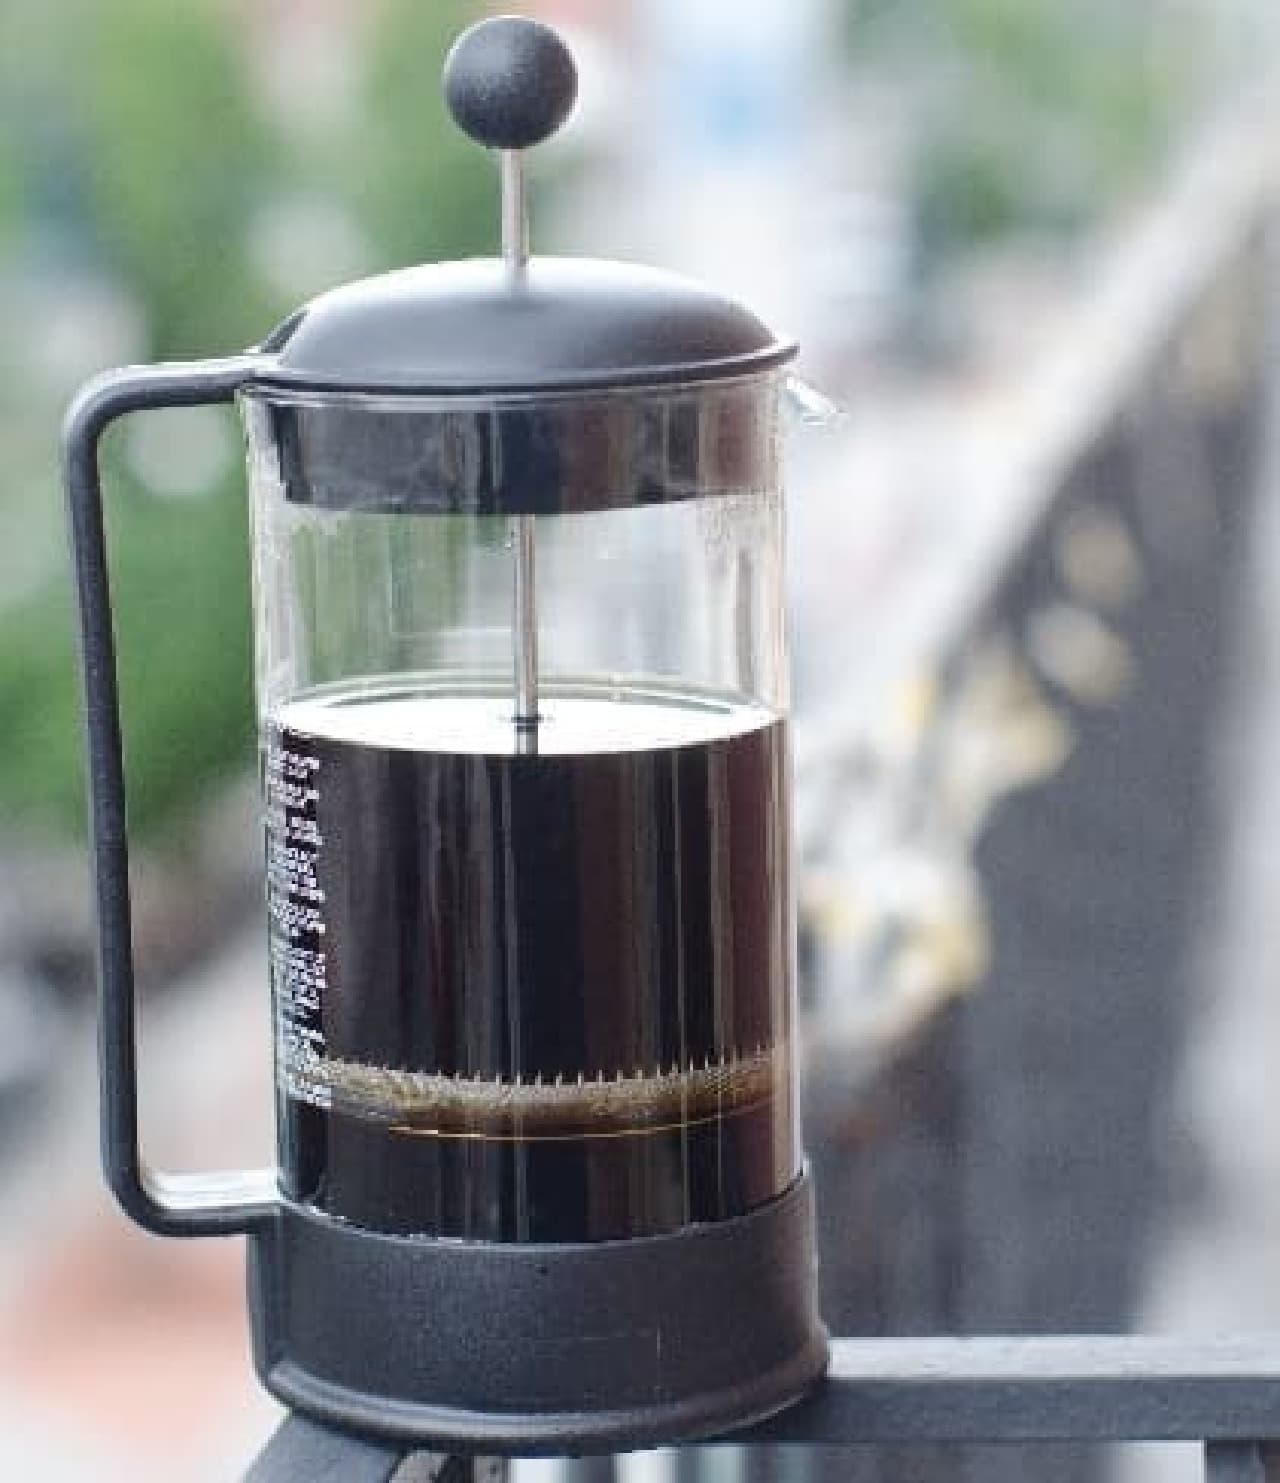 Reference image: French press